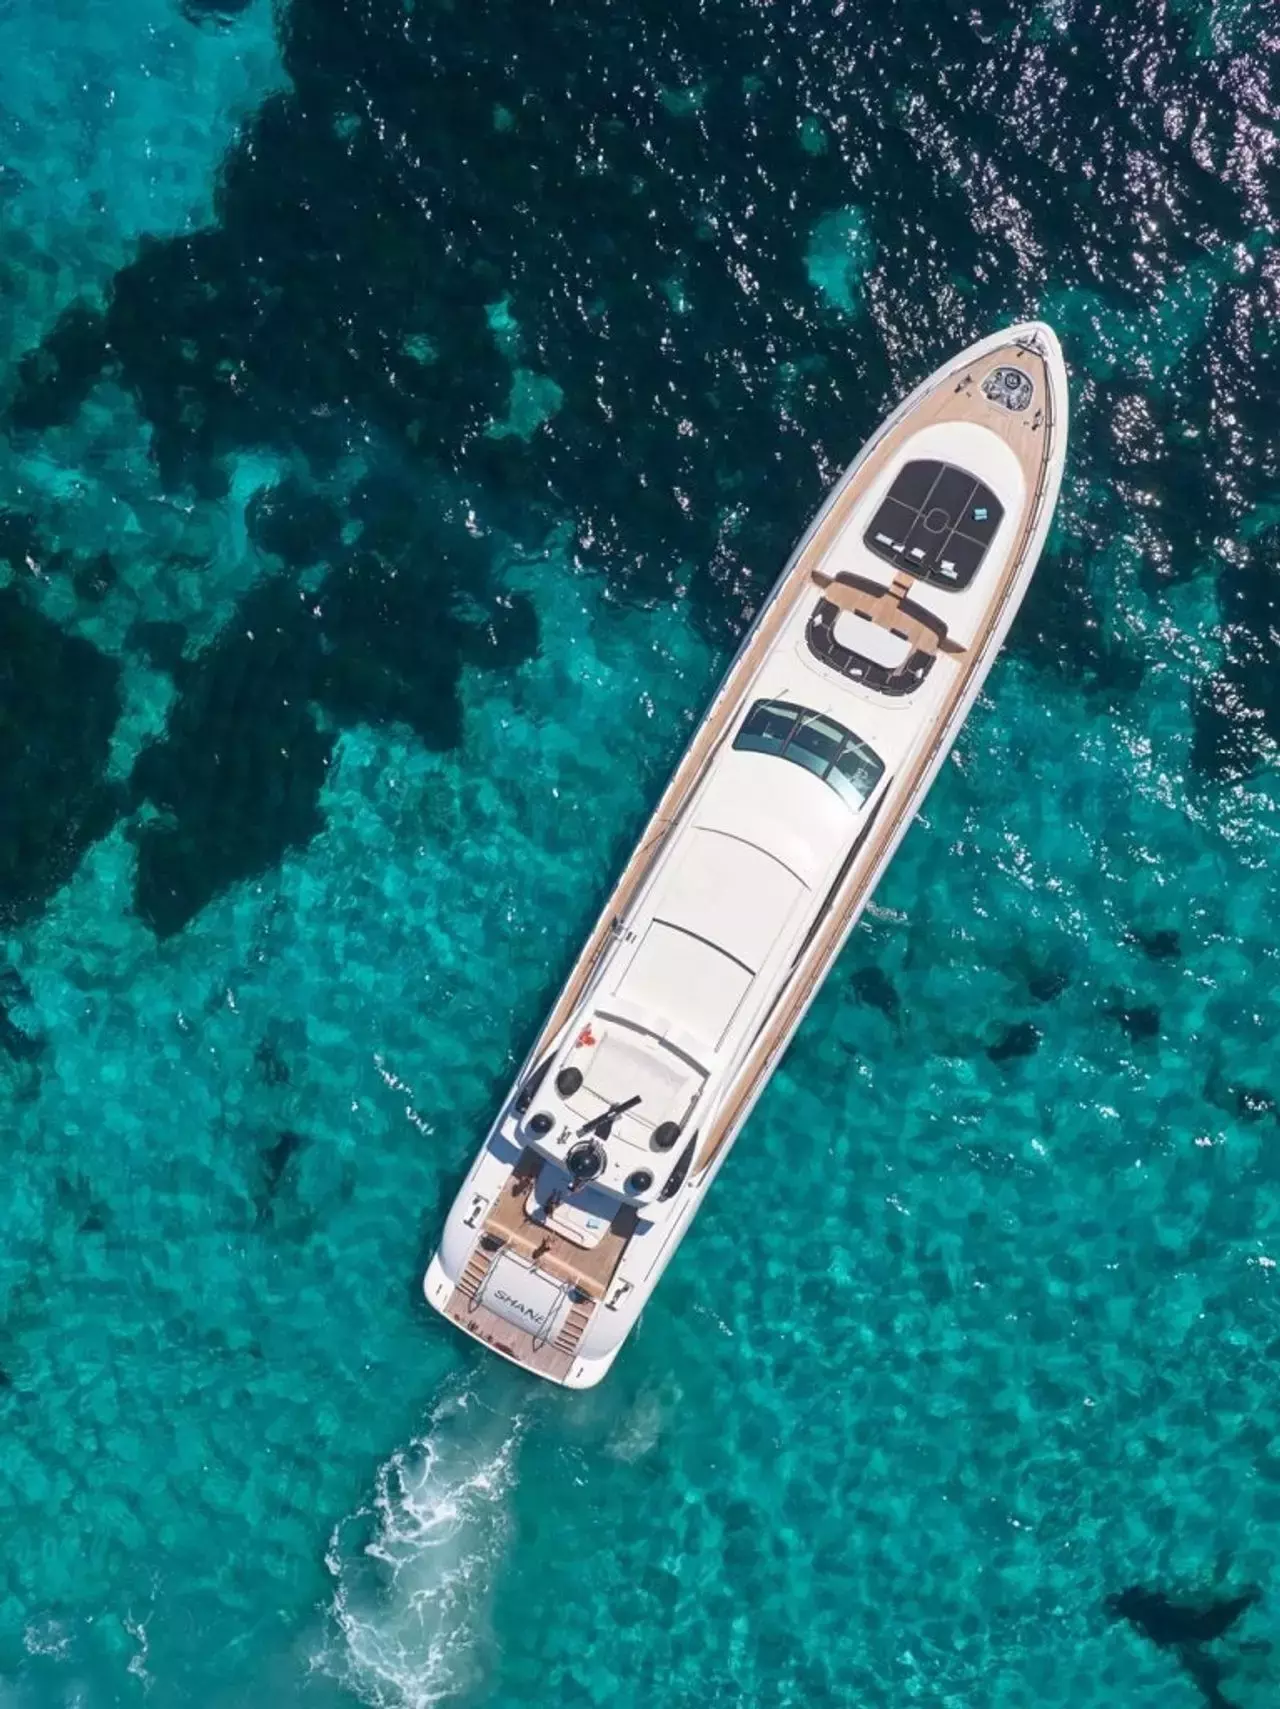 Shane by Mangusta - Special Offer for a private Superyacht Rental in Mallorca with a crew